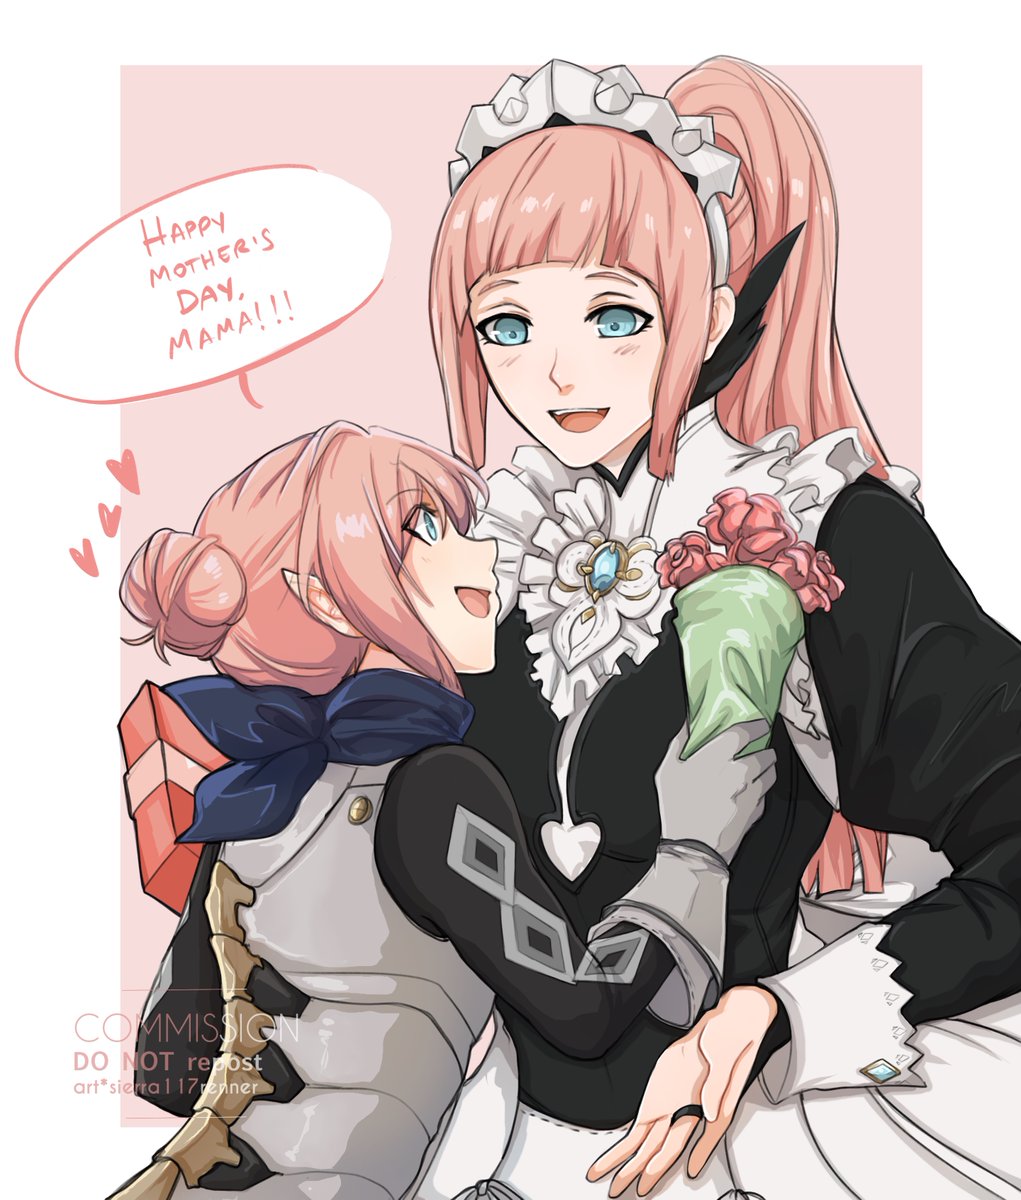 Commission done! for @OCDGeek128 ✨ #fireemblem
Happy Mother's day for Felicia! :3